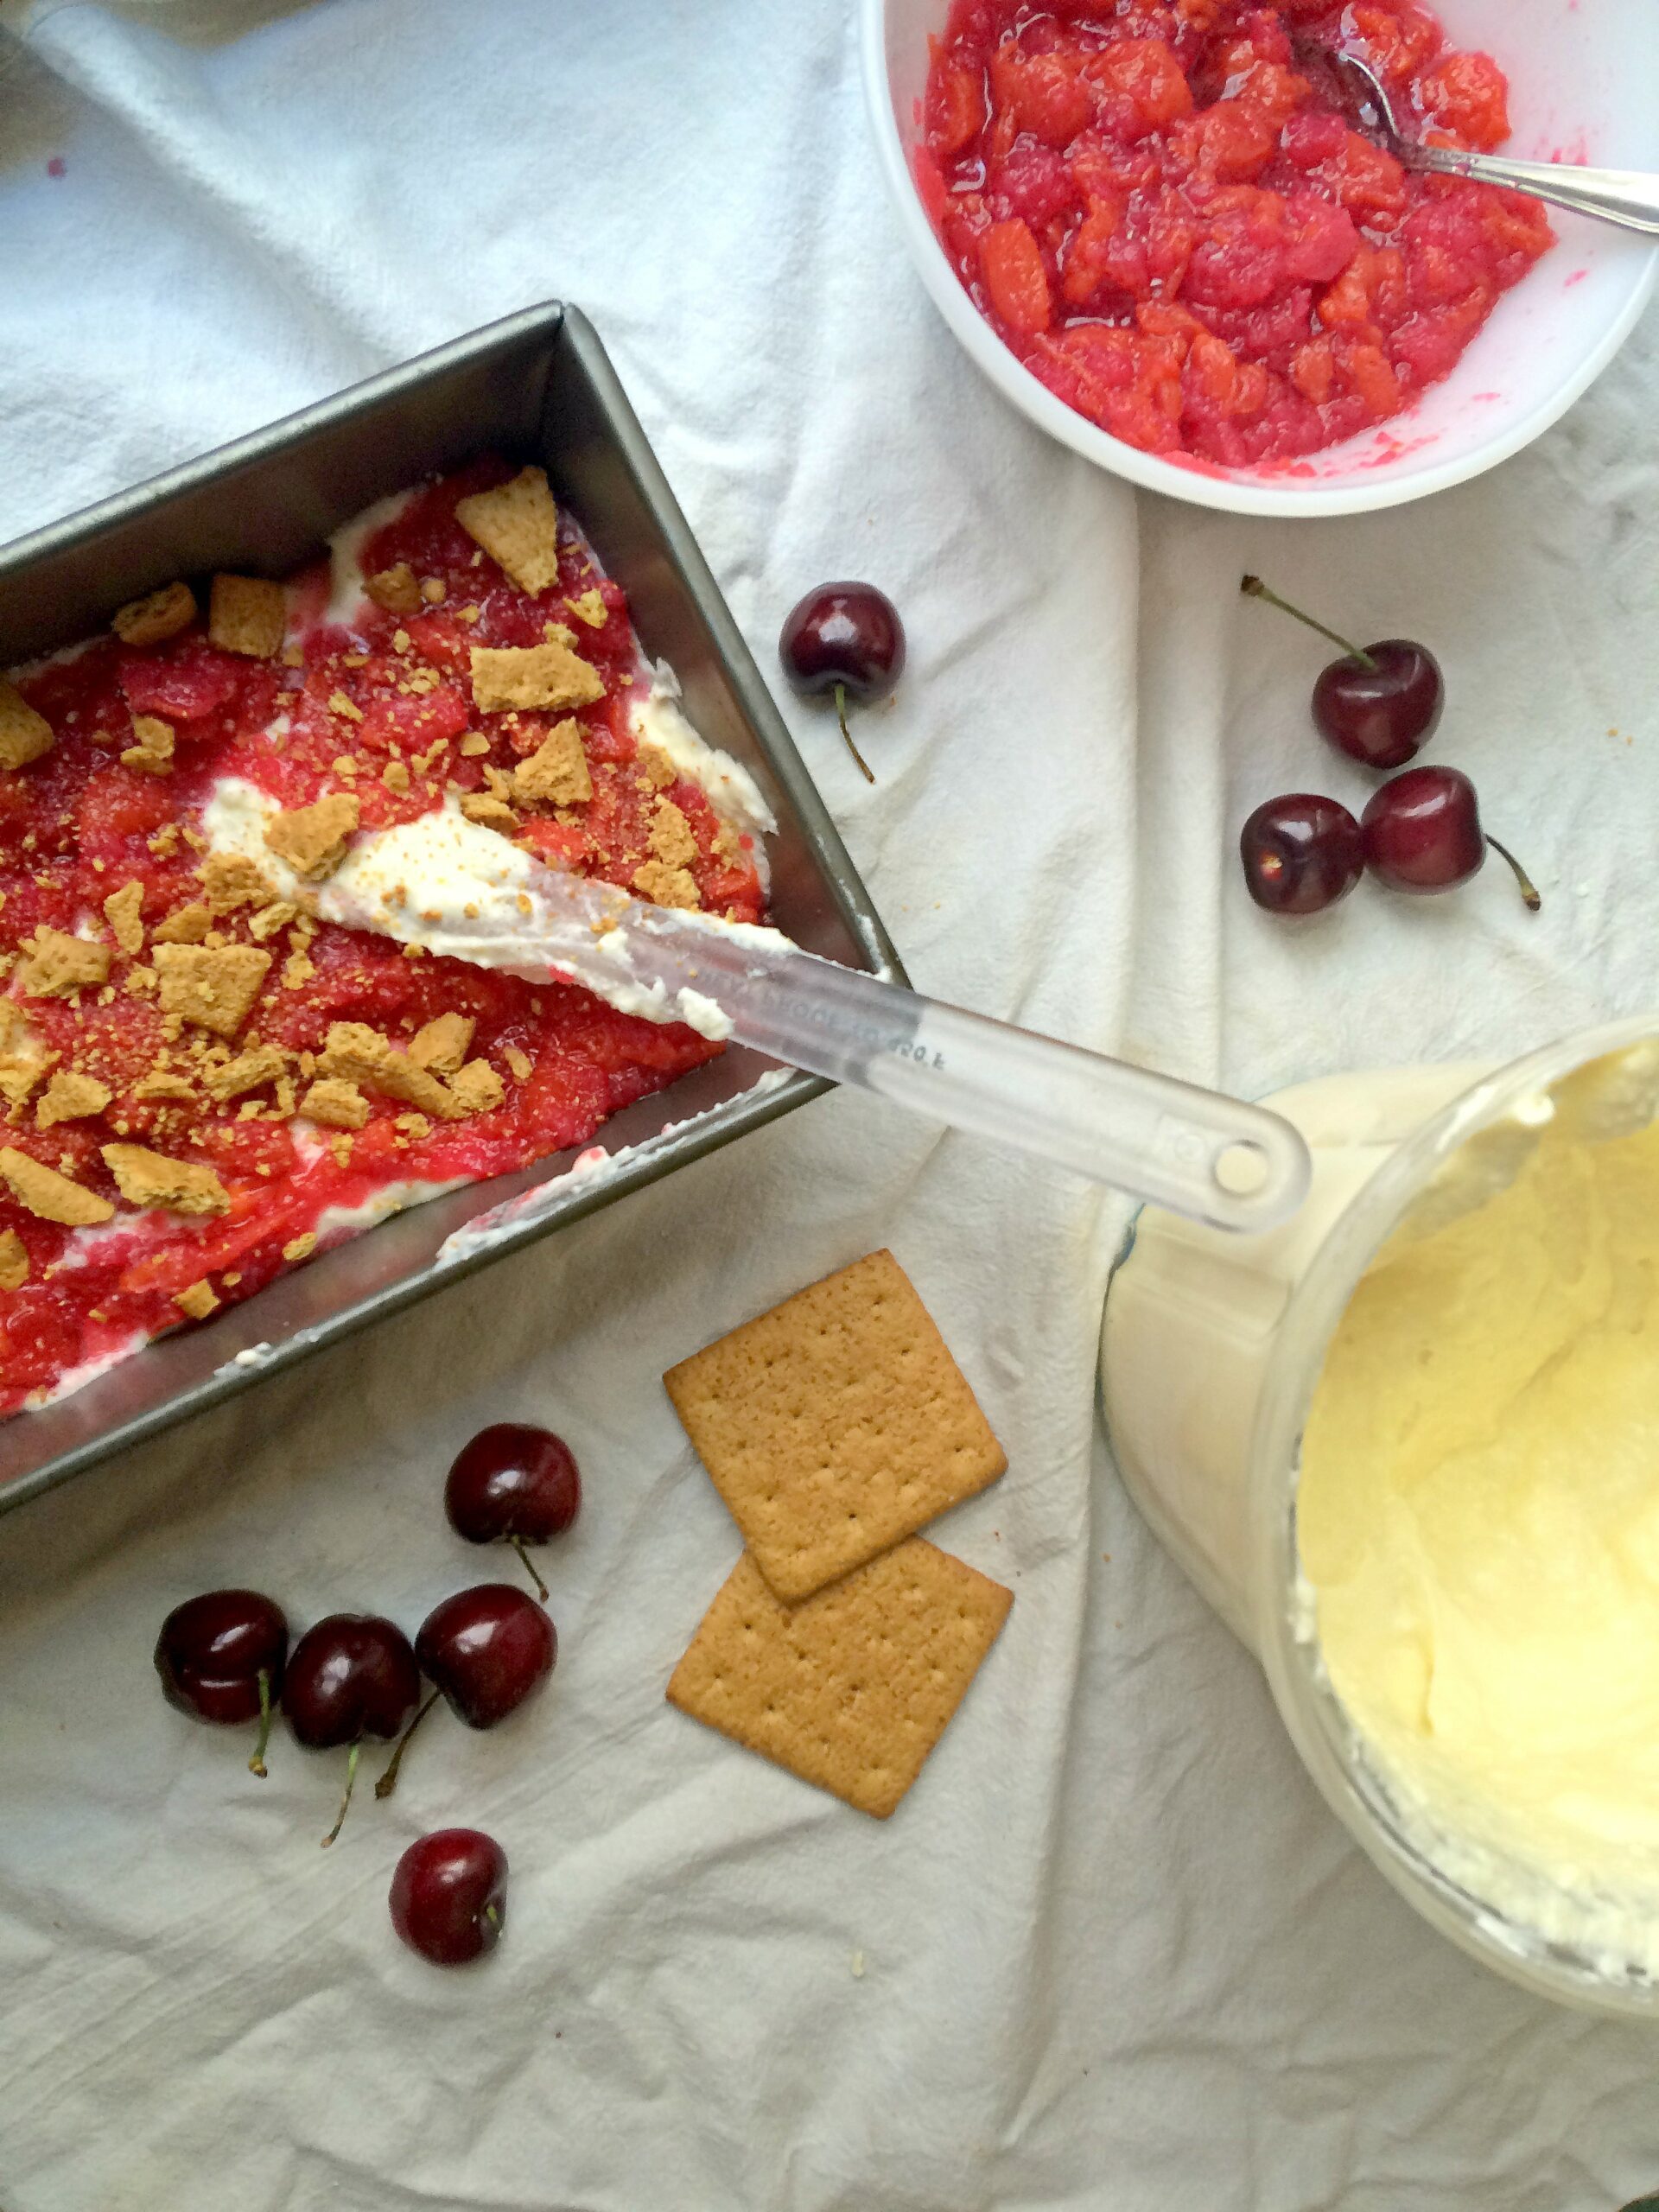 No-churn Cherry Cheesecake Ice Cream is the perfect summer treat! Whip up this homemade recipe in no time and have your kids begging for more.